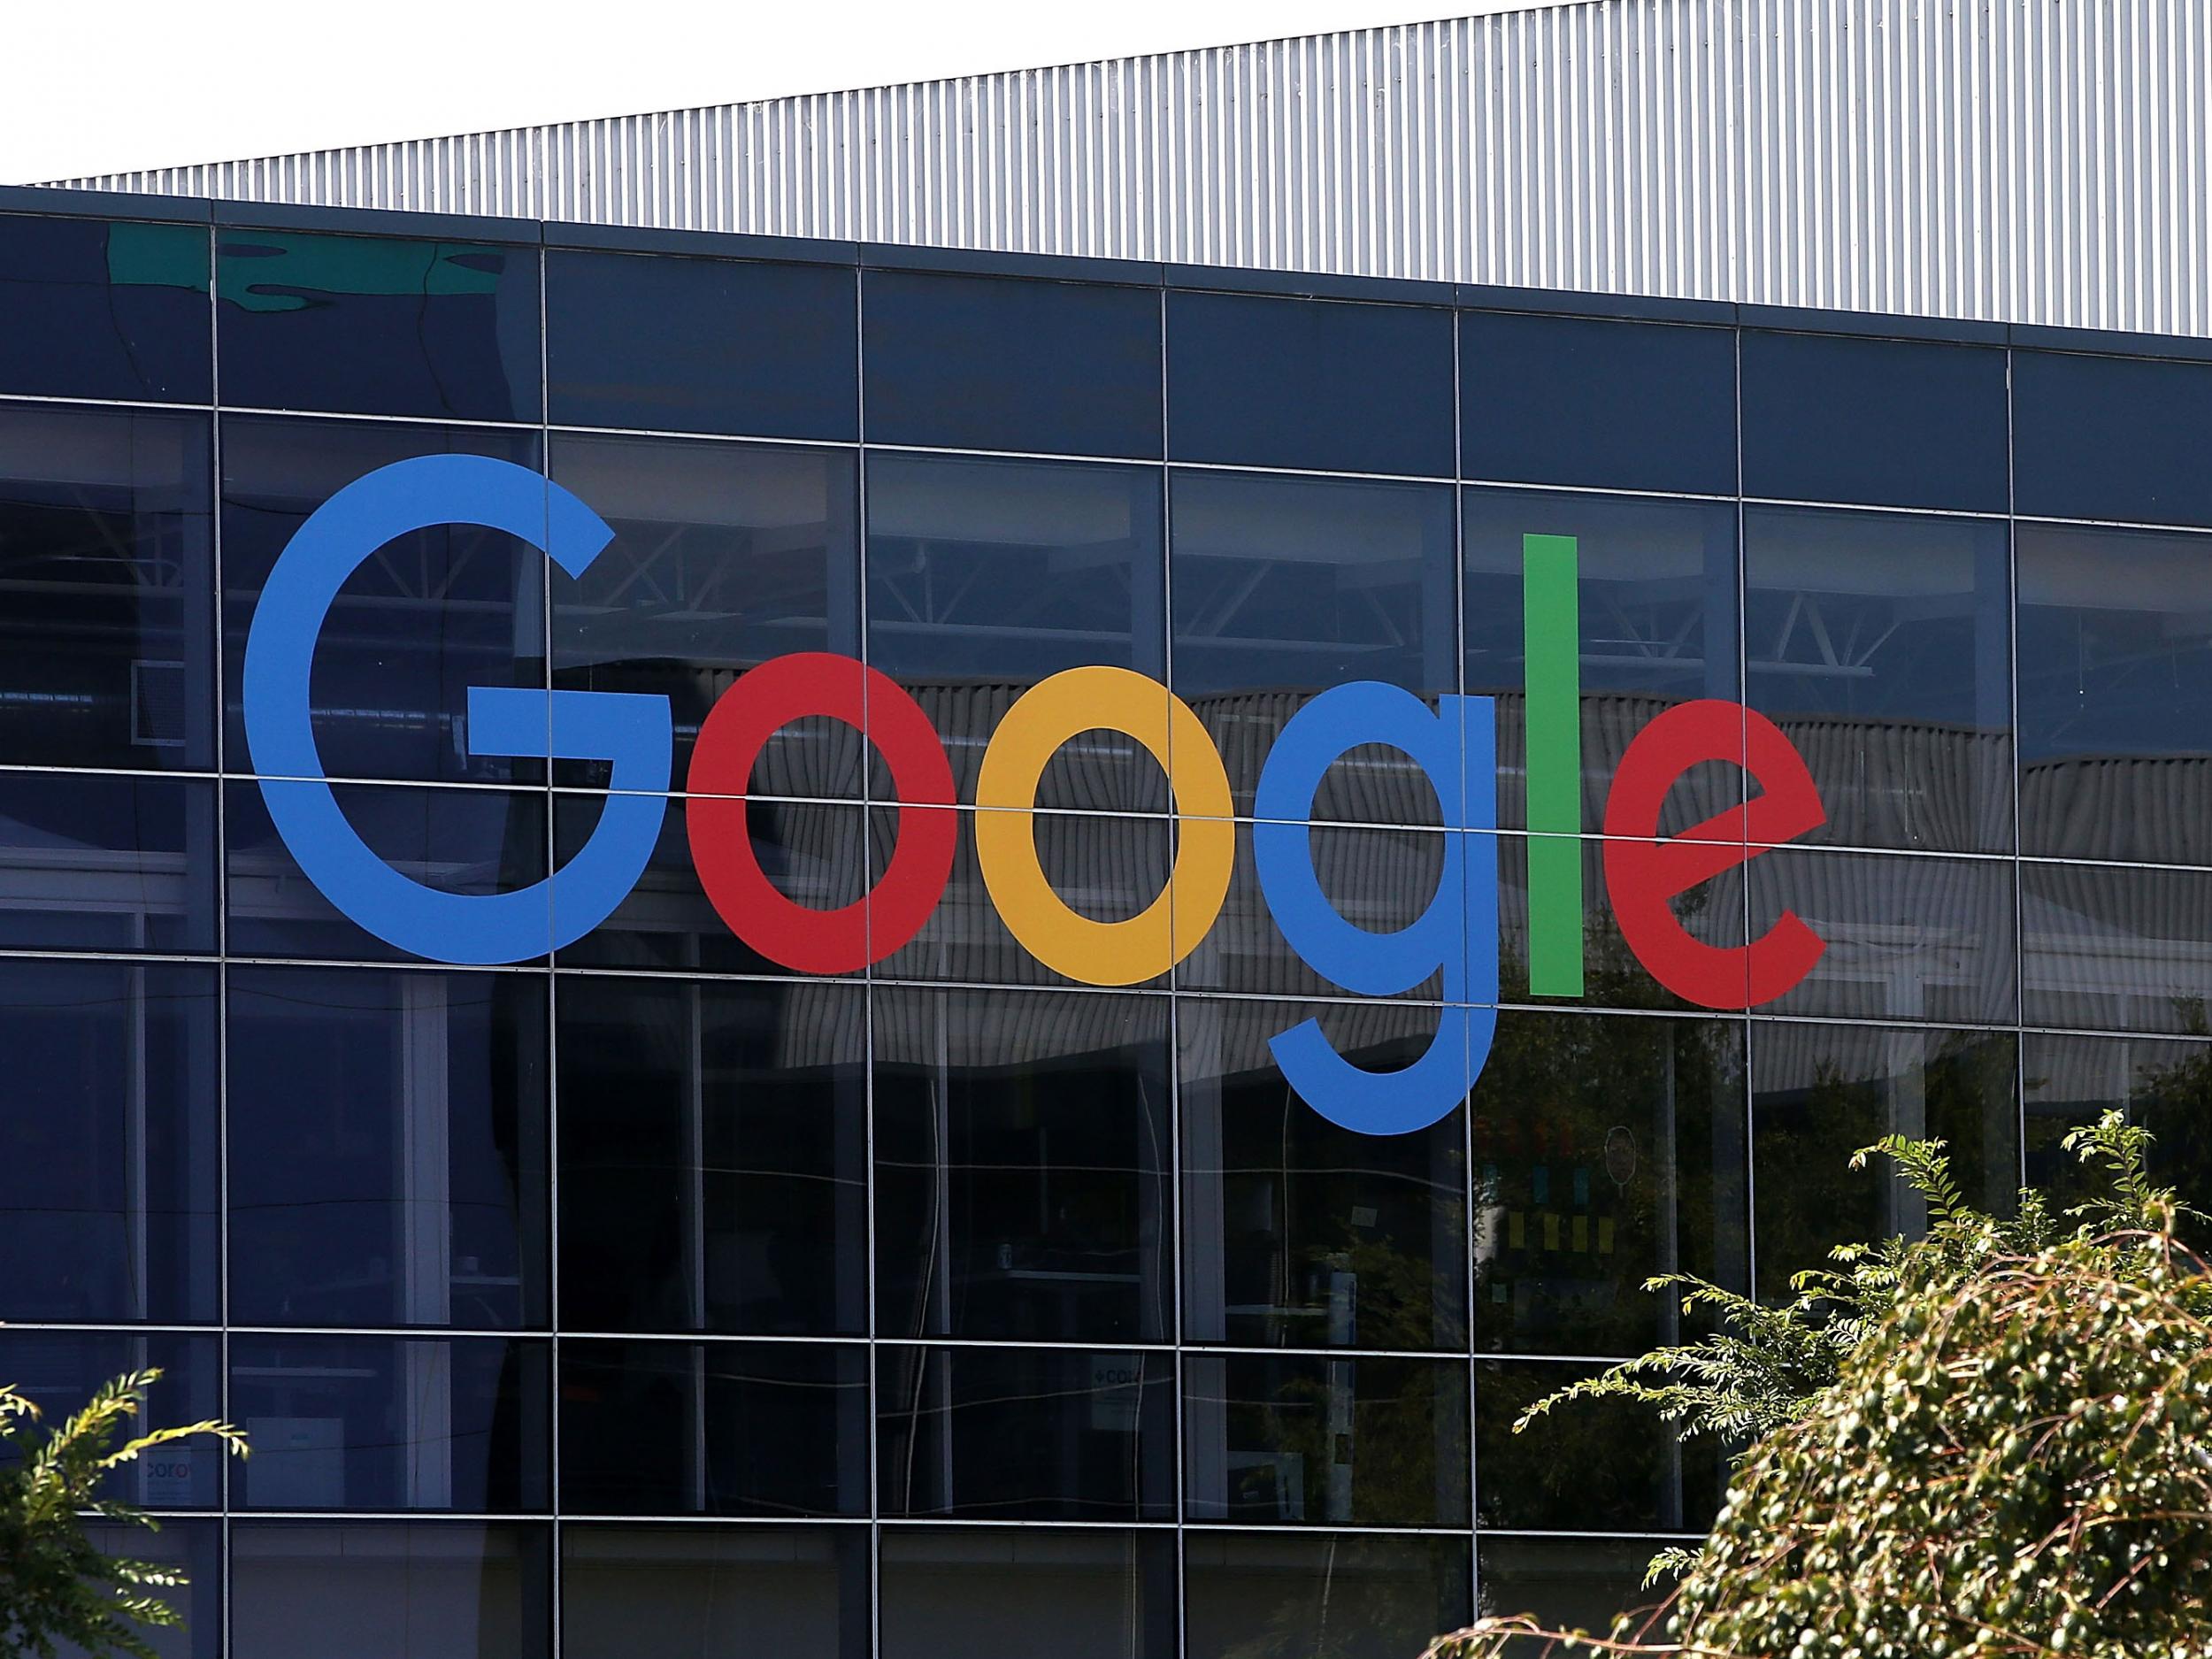 The new Google logo is displayed at the Google headquarters